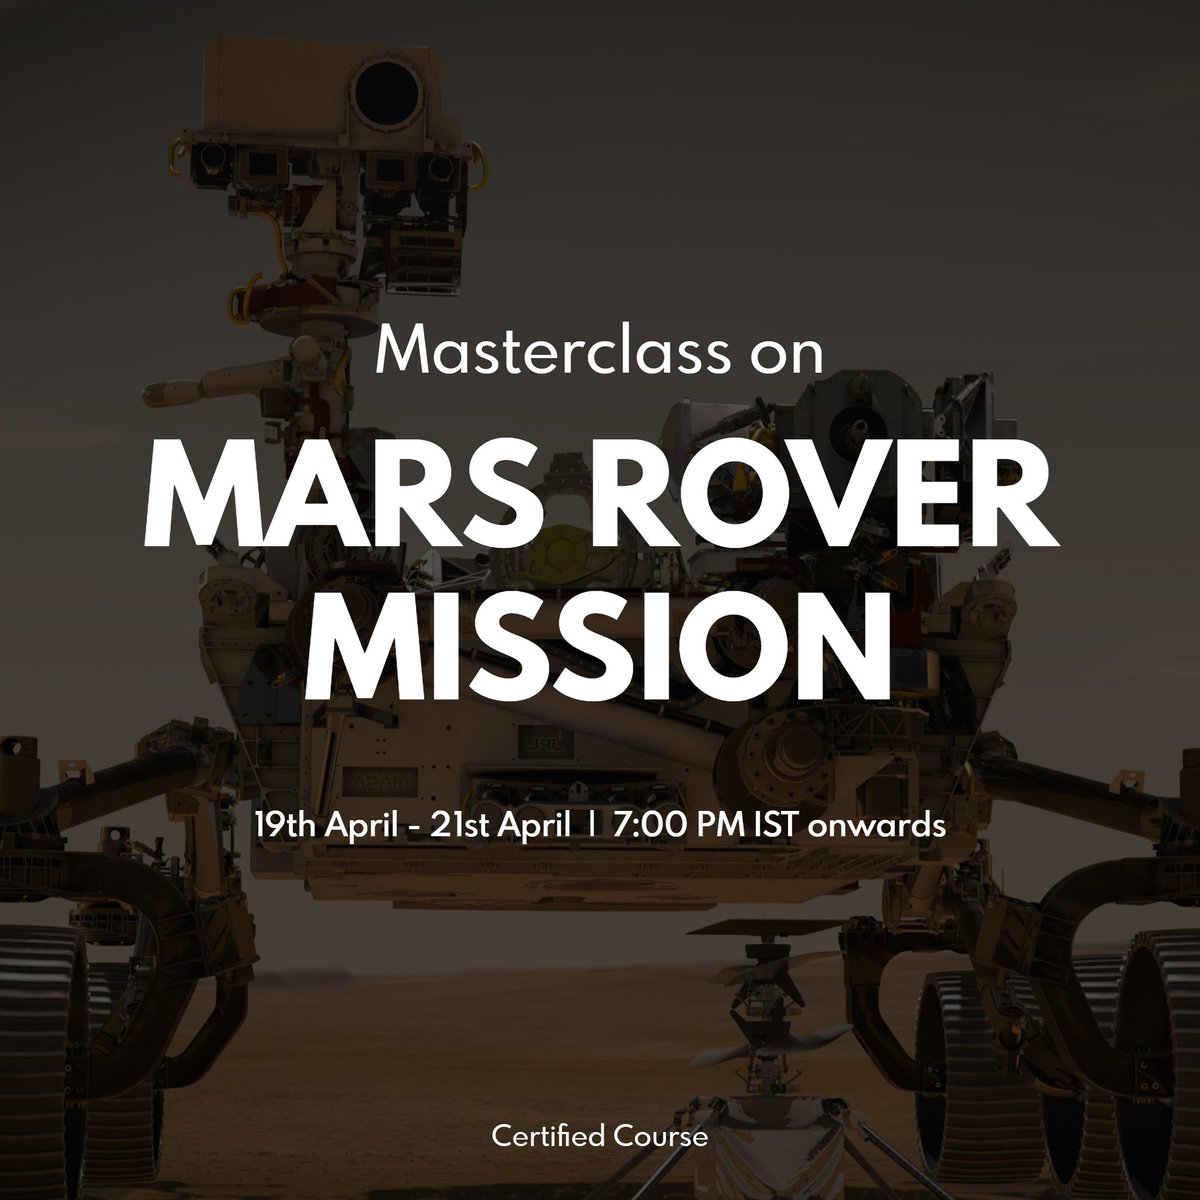 Rovers are helping us in discovering and studying the Martian environment at its best. We are coming up with a Masterclass on Mars Rover Mission (MMRM). Date: 19th April - 21st April Registration fees: INR 900 Registration link: bit.ly/MMRM-STAR